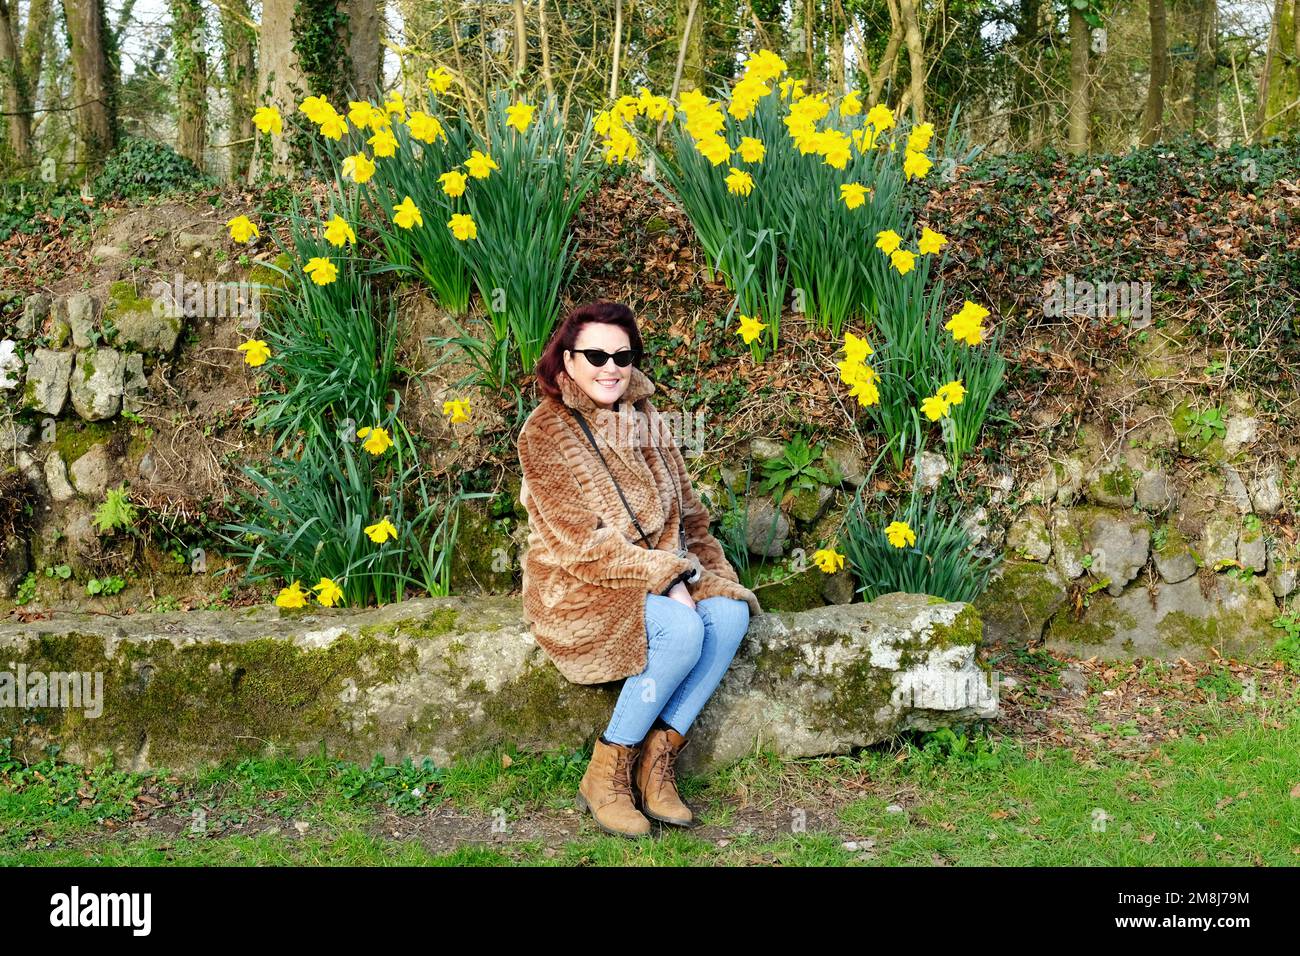 Attractive mature woman seated in front of flowering daffodils - John Gollop Stock Photo